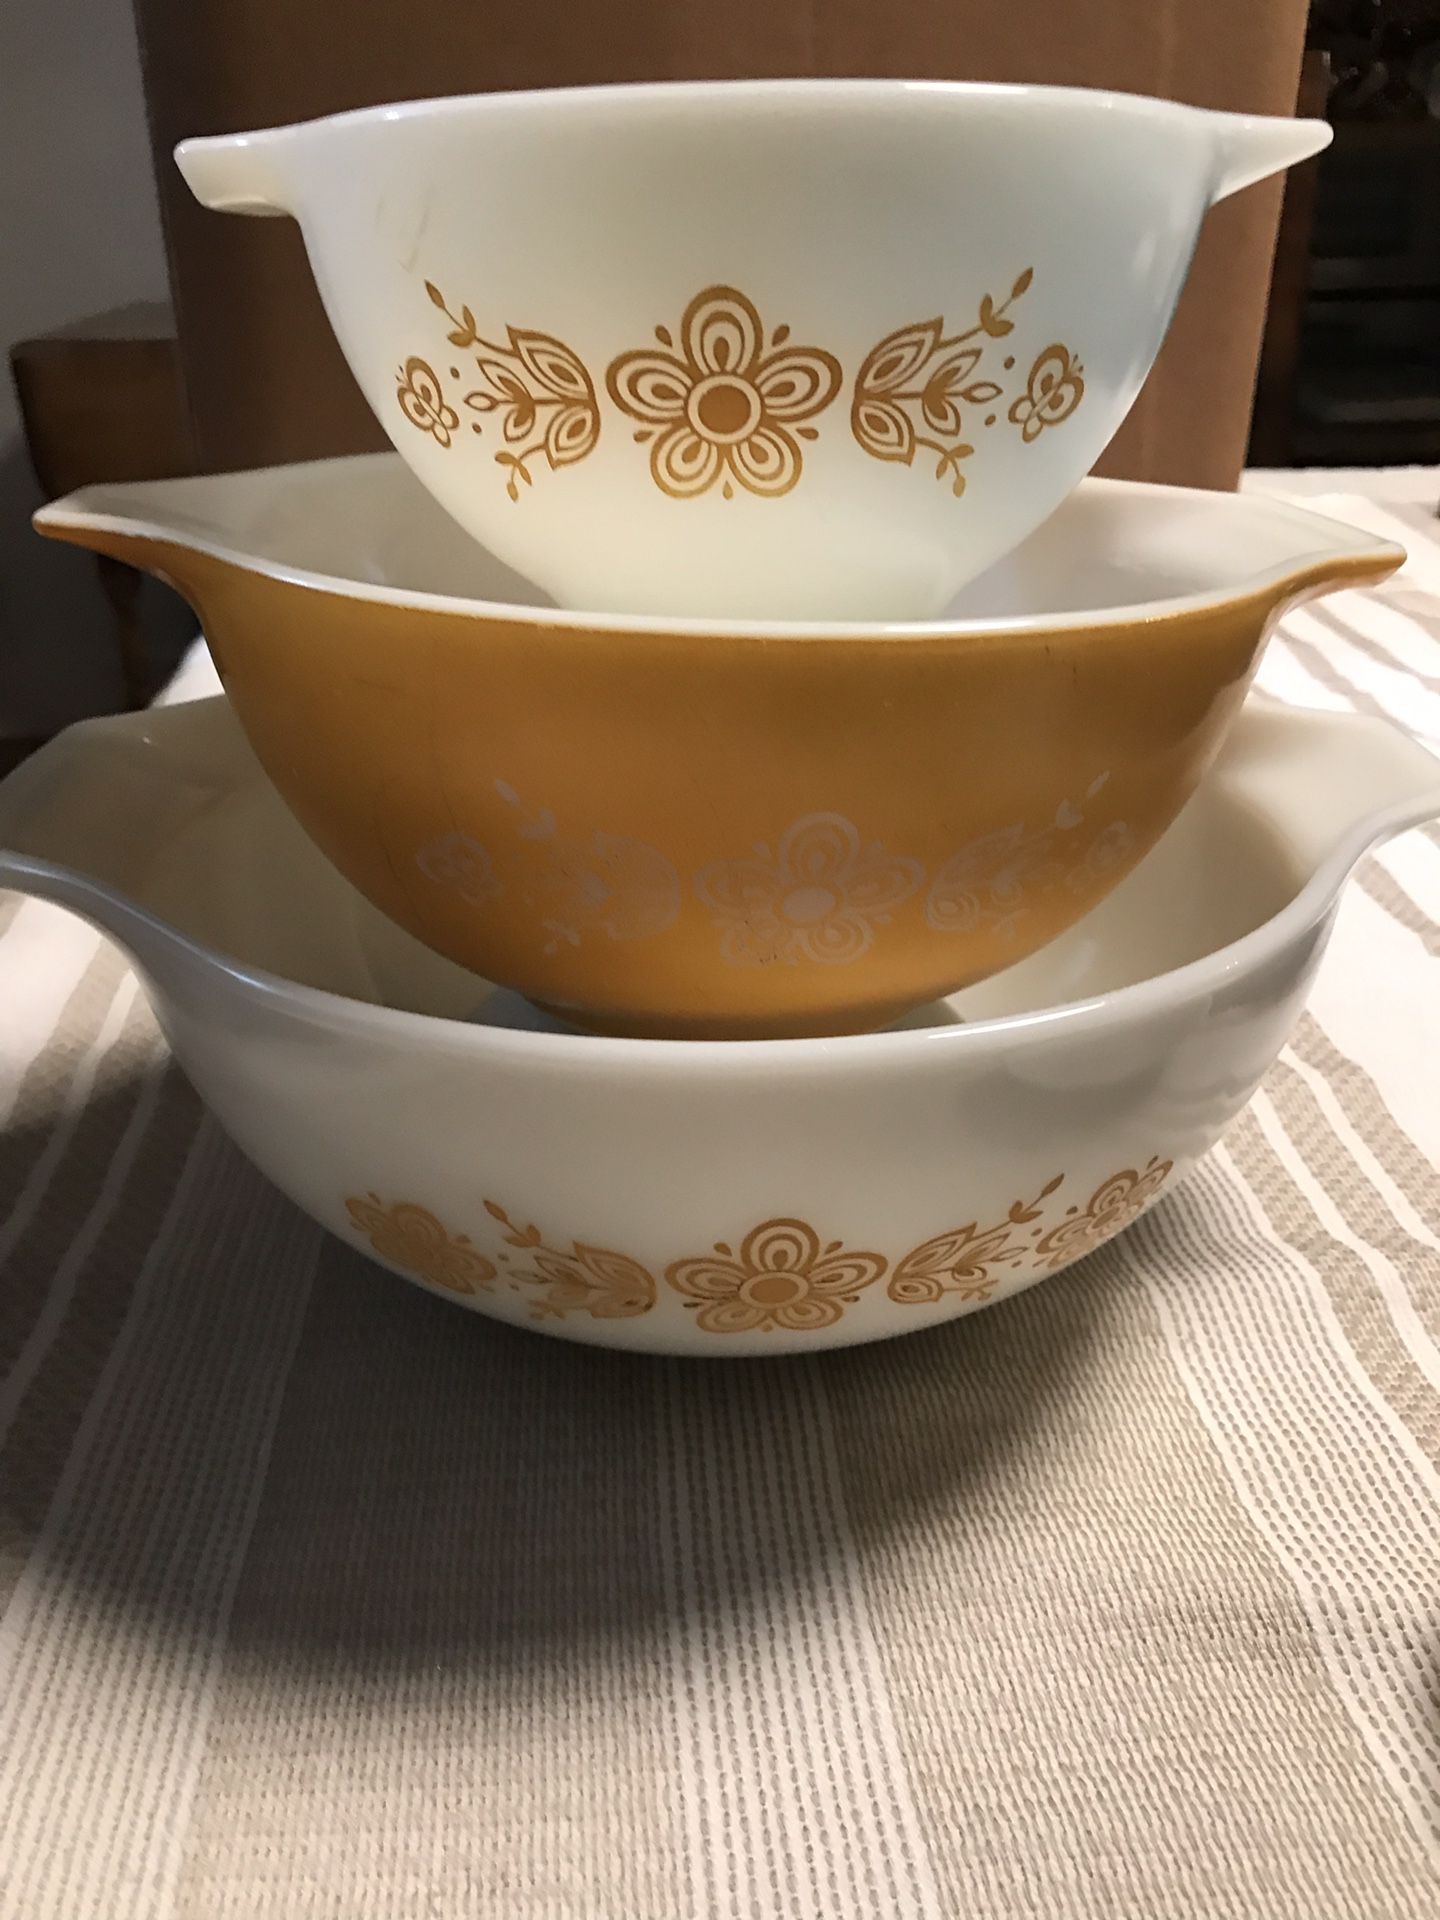 Vintage Whit and Gold Nesting Pyrex